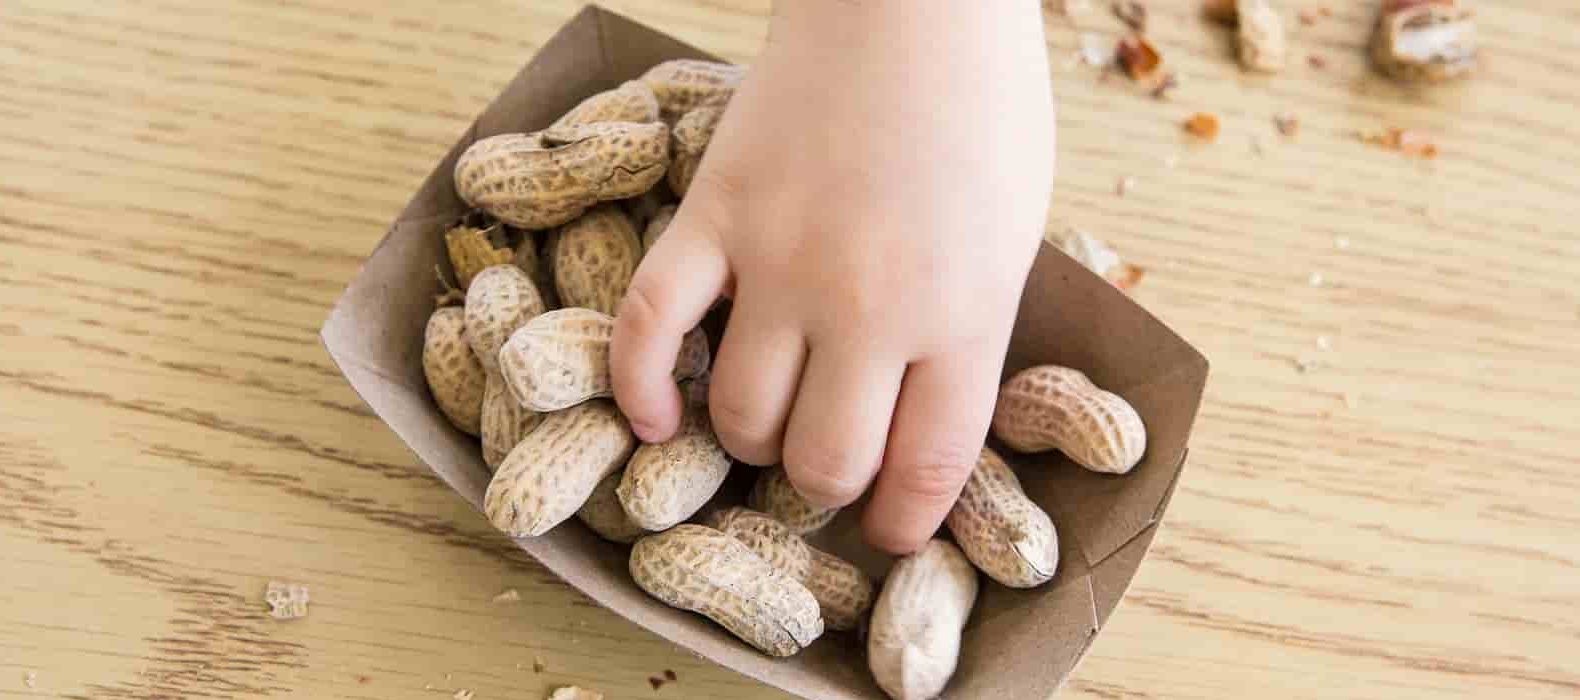  Buy The Latest Types of Peanut Allergy At a Reasonable Price 